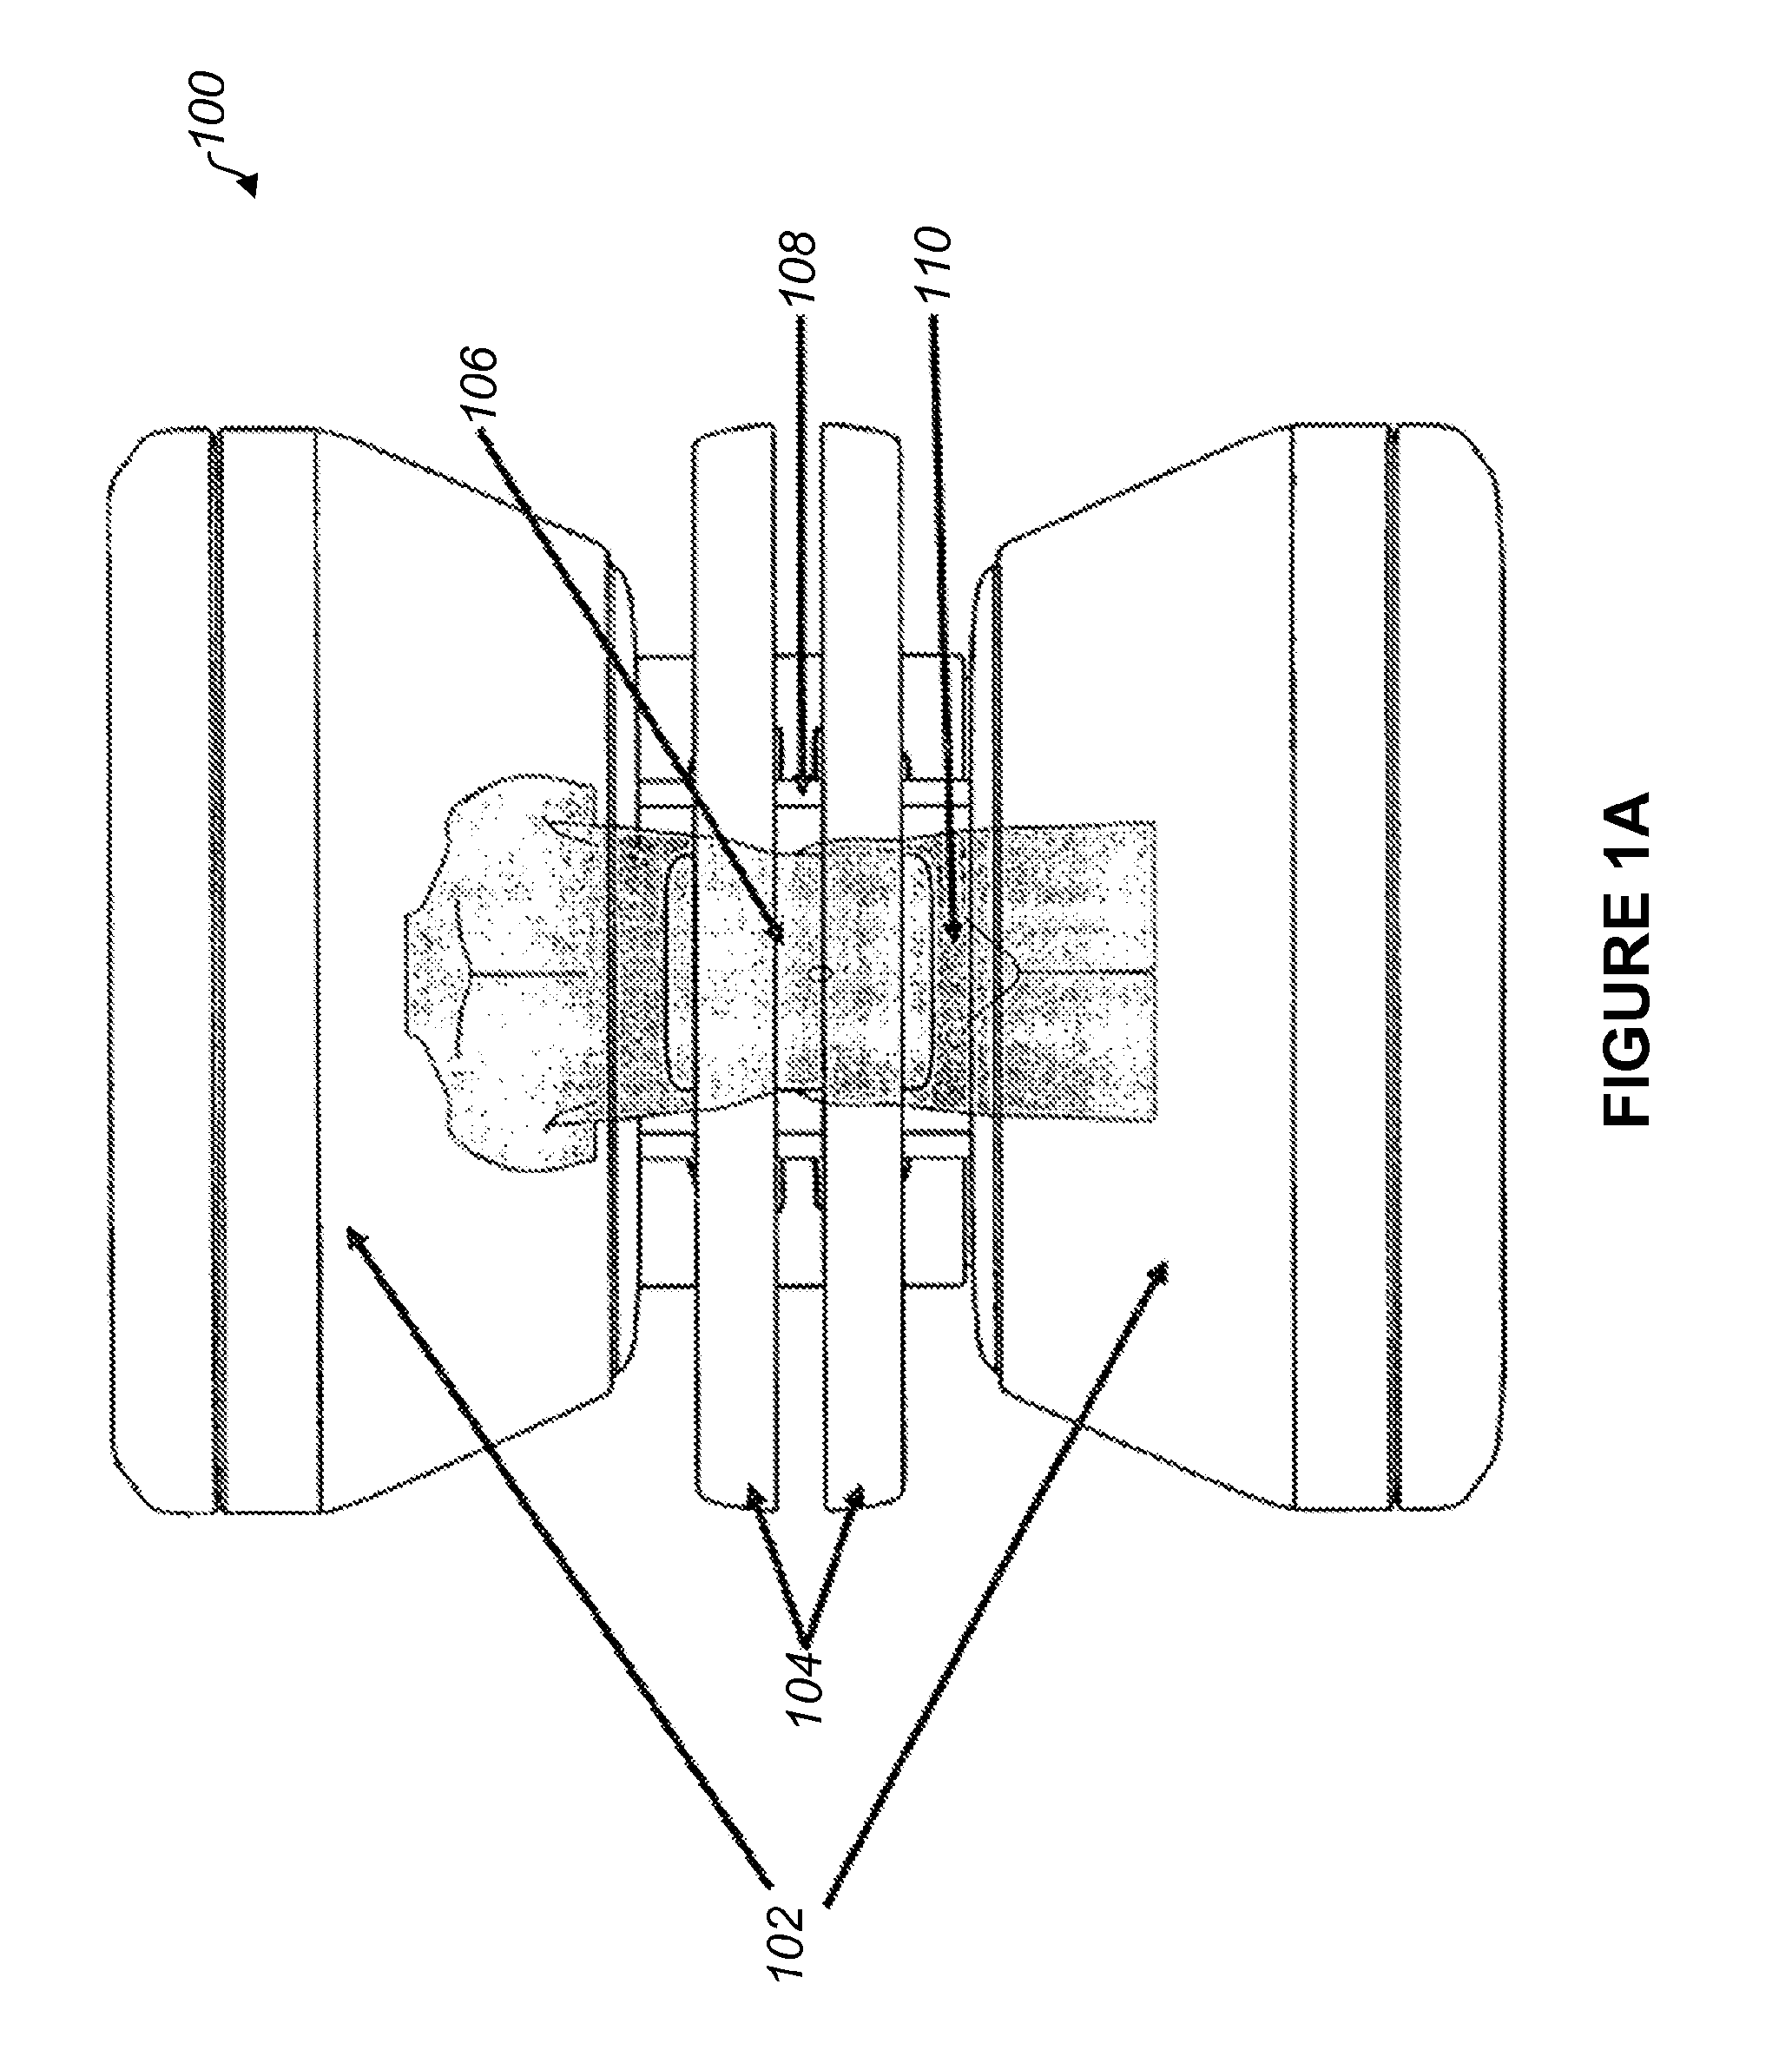 Method And Apparatus For Shielding A Linear Accelerator And A Magnetic Resonance Imaging Device From Each Other